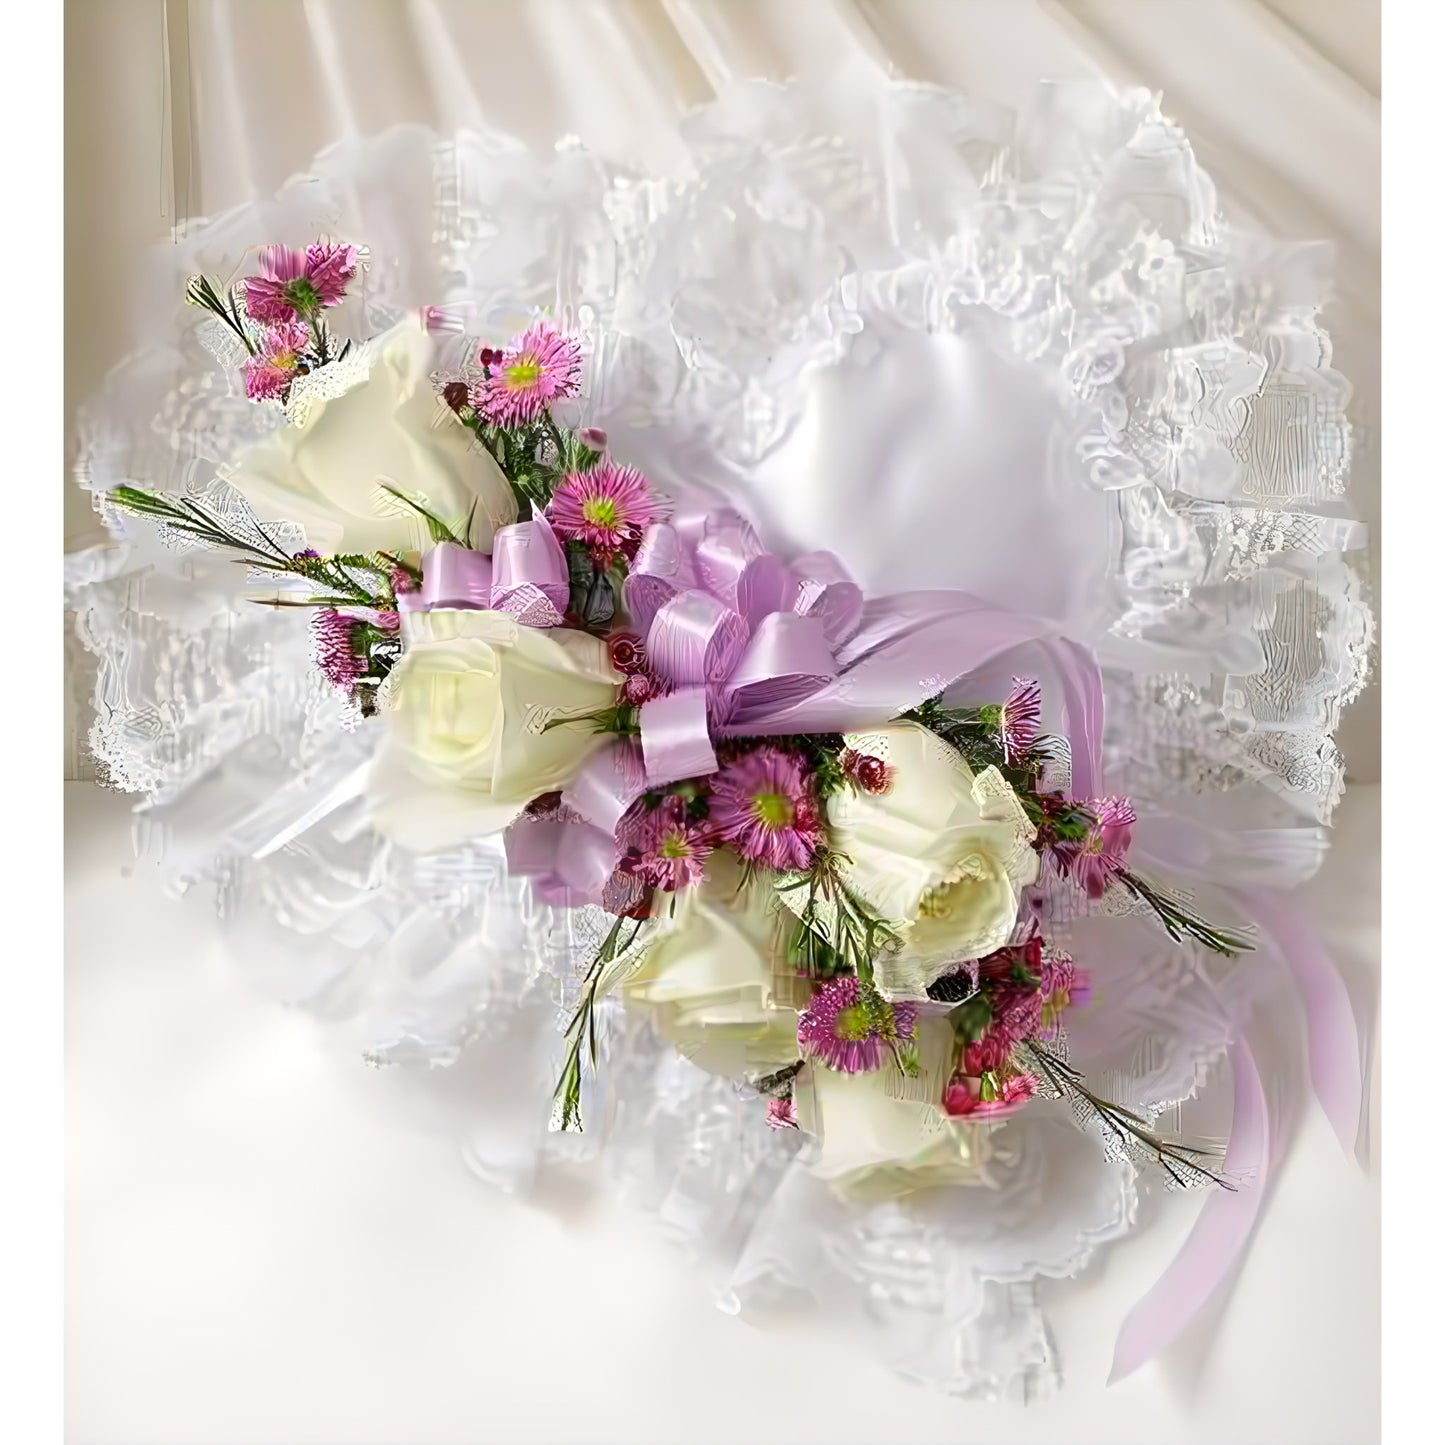 Lavender and White Satin Heart Casket Pillow - Floral_Arrangement - Flower Delivery NYC